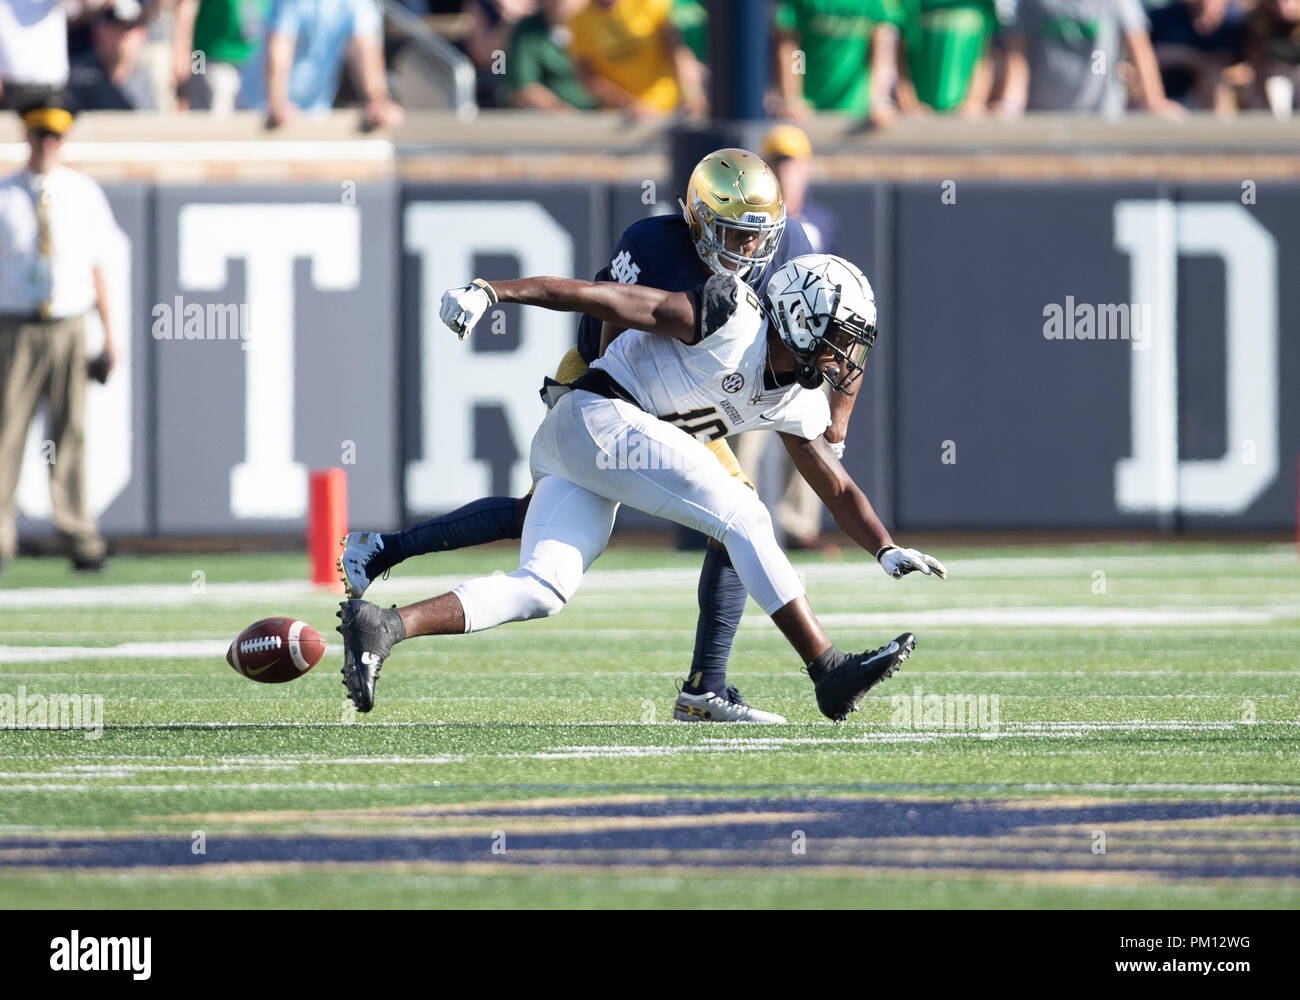 South Bend, Indiana, USA. 15th Sep, 2018. Notre Dame defensive back Troy Pride Jr. (5) defends pass intended for Vanderbilt wide receiver Kalija Lipscomb (16) during NCAA football game action between the Vanderbilt Commodores and the Notre Dame Fighting Irish at Notre Dame Stadium in South Bend, Indiana. Notre Dame defeated Vanderbilt 22-17. John Mersits/CSM/Alamy Live News Stock Photo